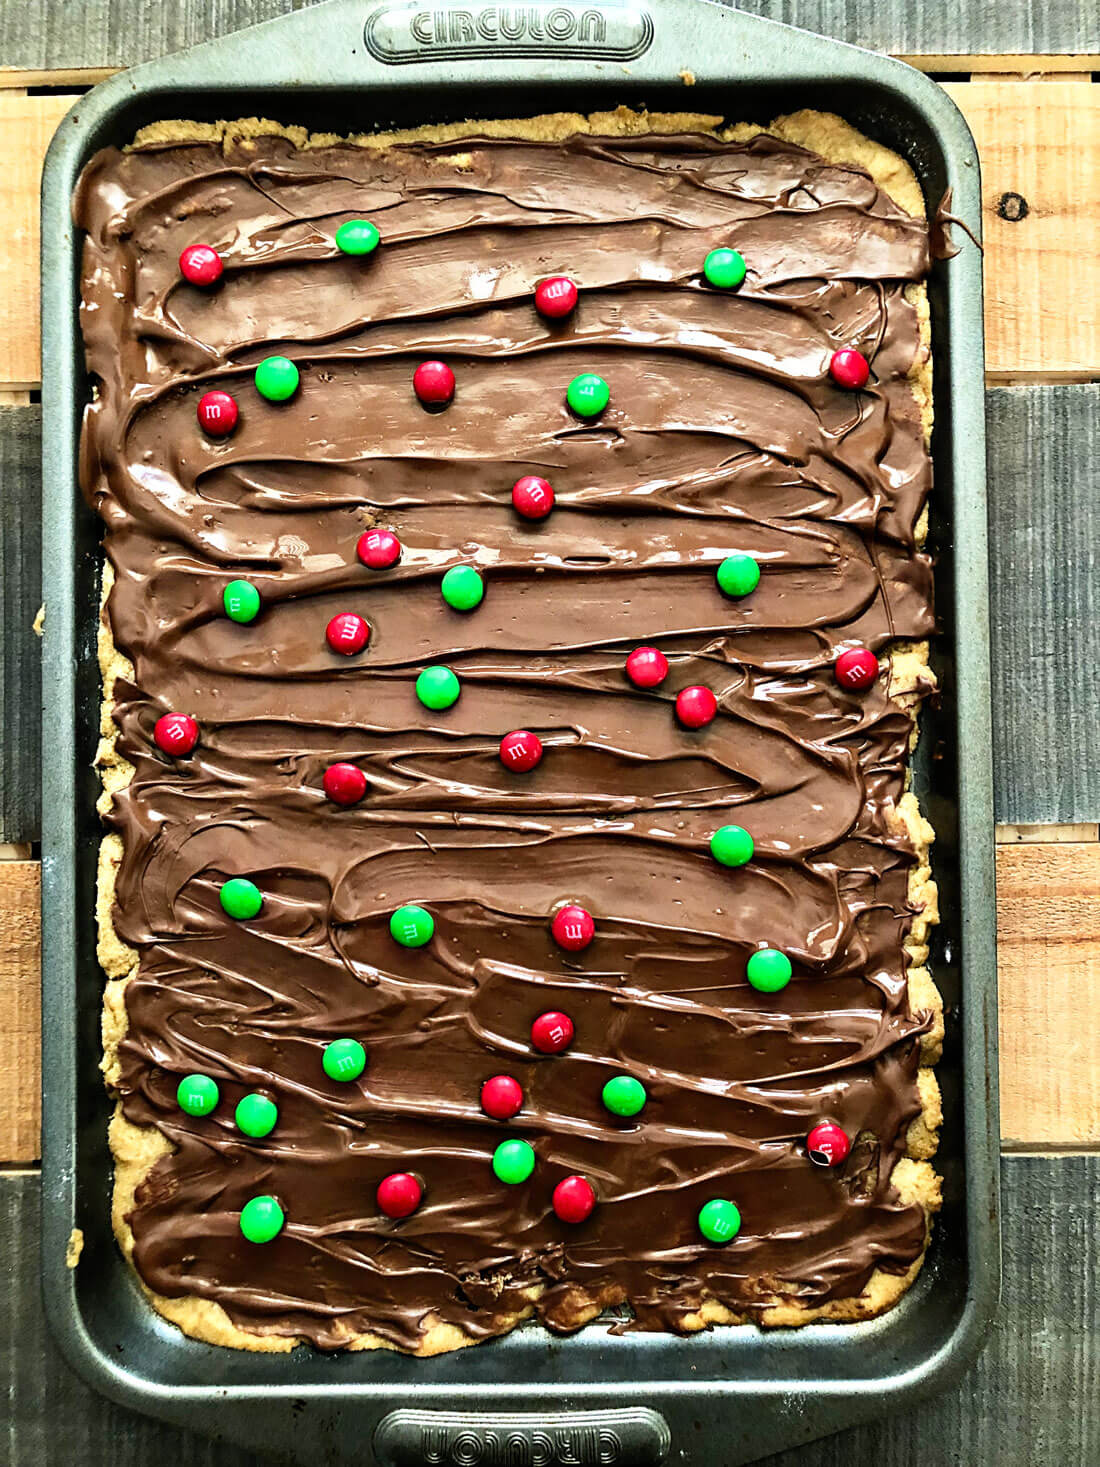 Let cool for a few minutes and add M & M candies on top of the melted chocolate.